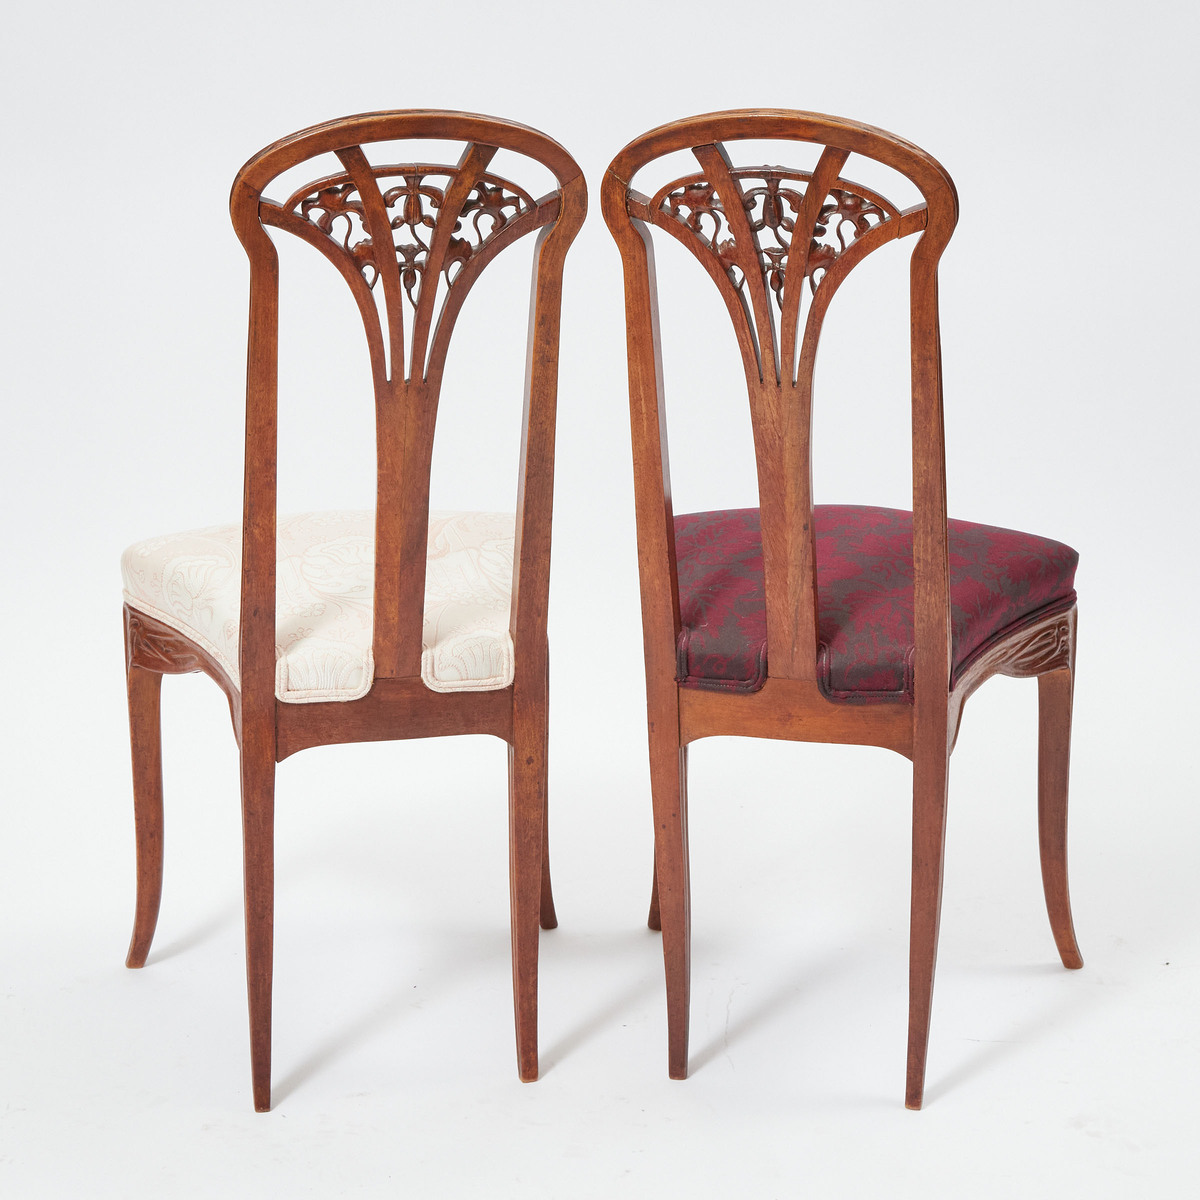 Pair of Louis Majorelle Frères et Cie Carved Mahogany 'Clematis' Side Chairs, c.1900, 37 x 17 x 19.2 - Image 2 of 2